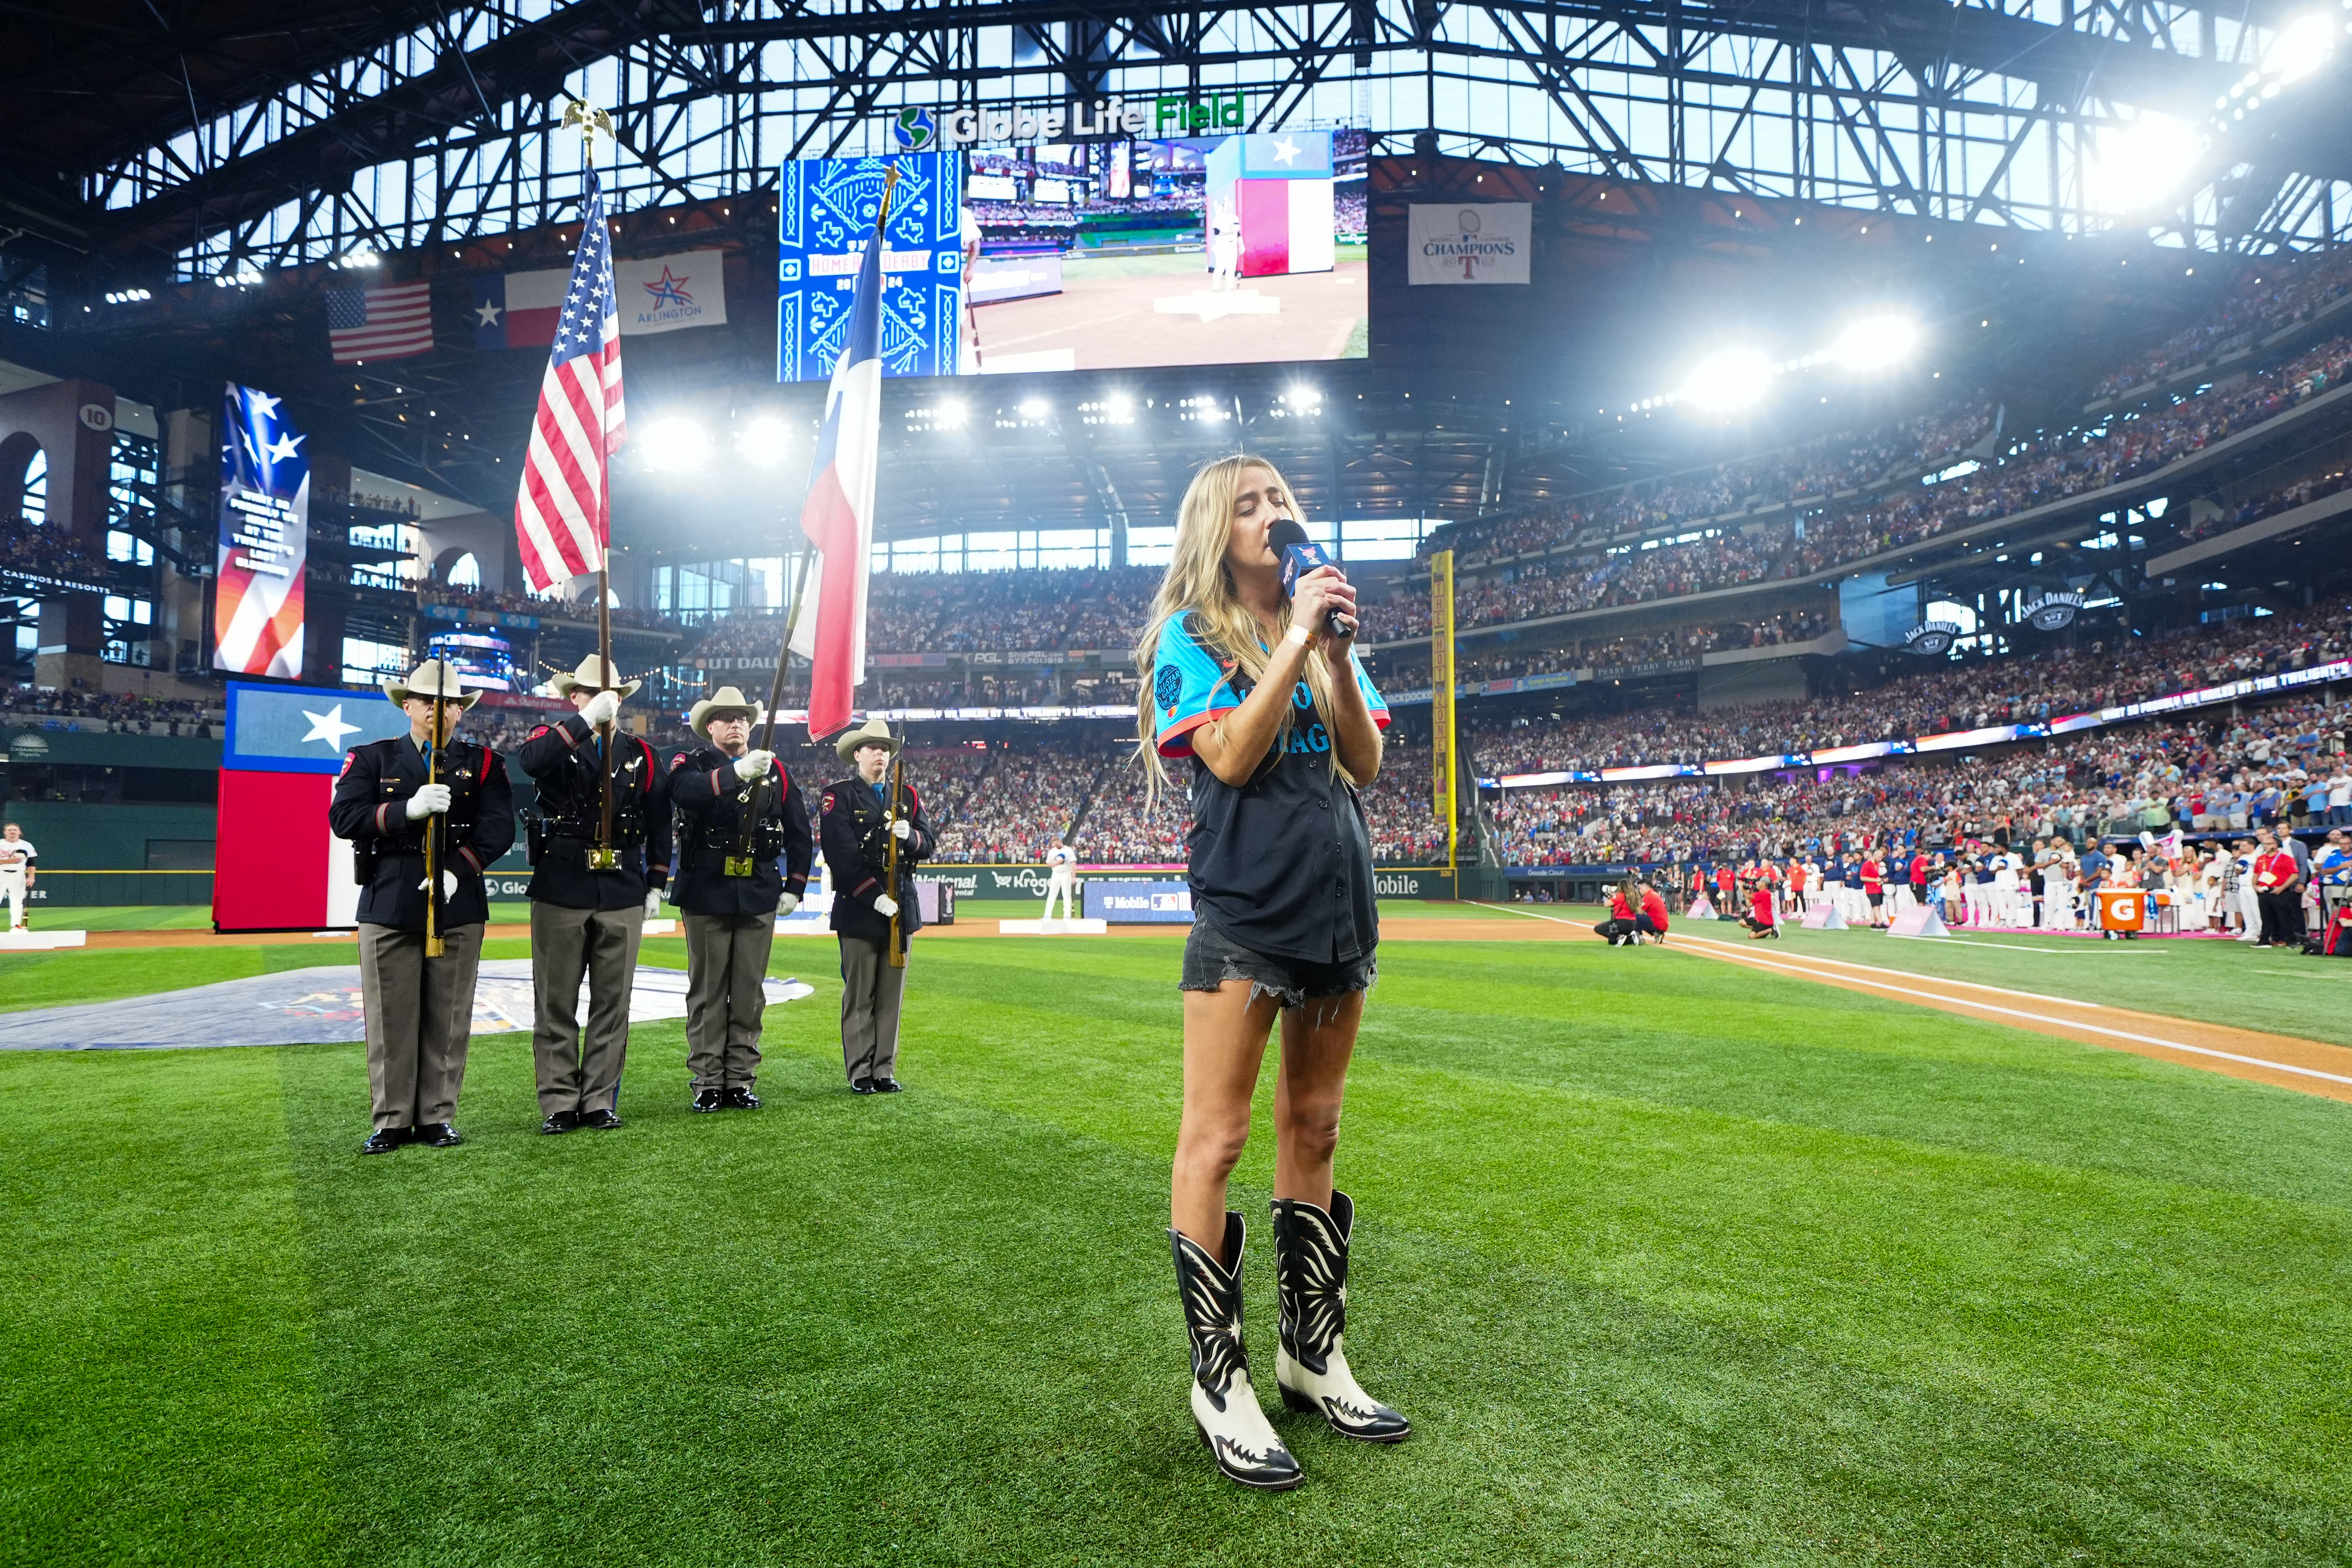 After Ingrid Andress performed the National Anthem at the Home Run Derby, she apologized and confessed the she was drunk at the time